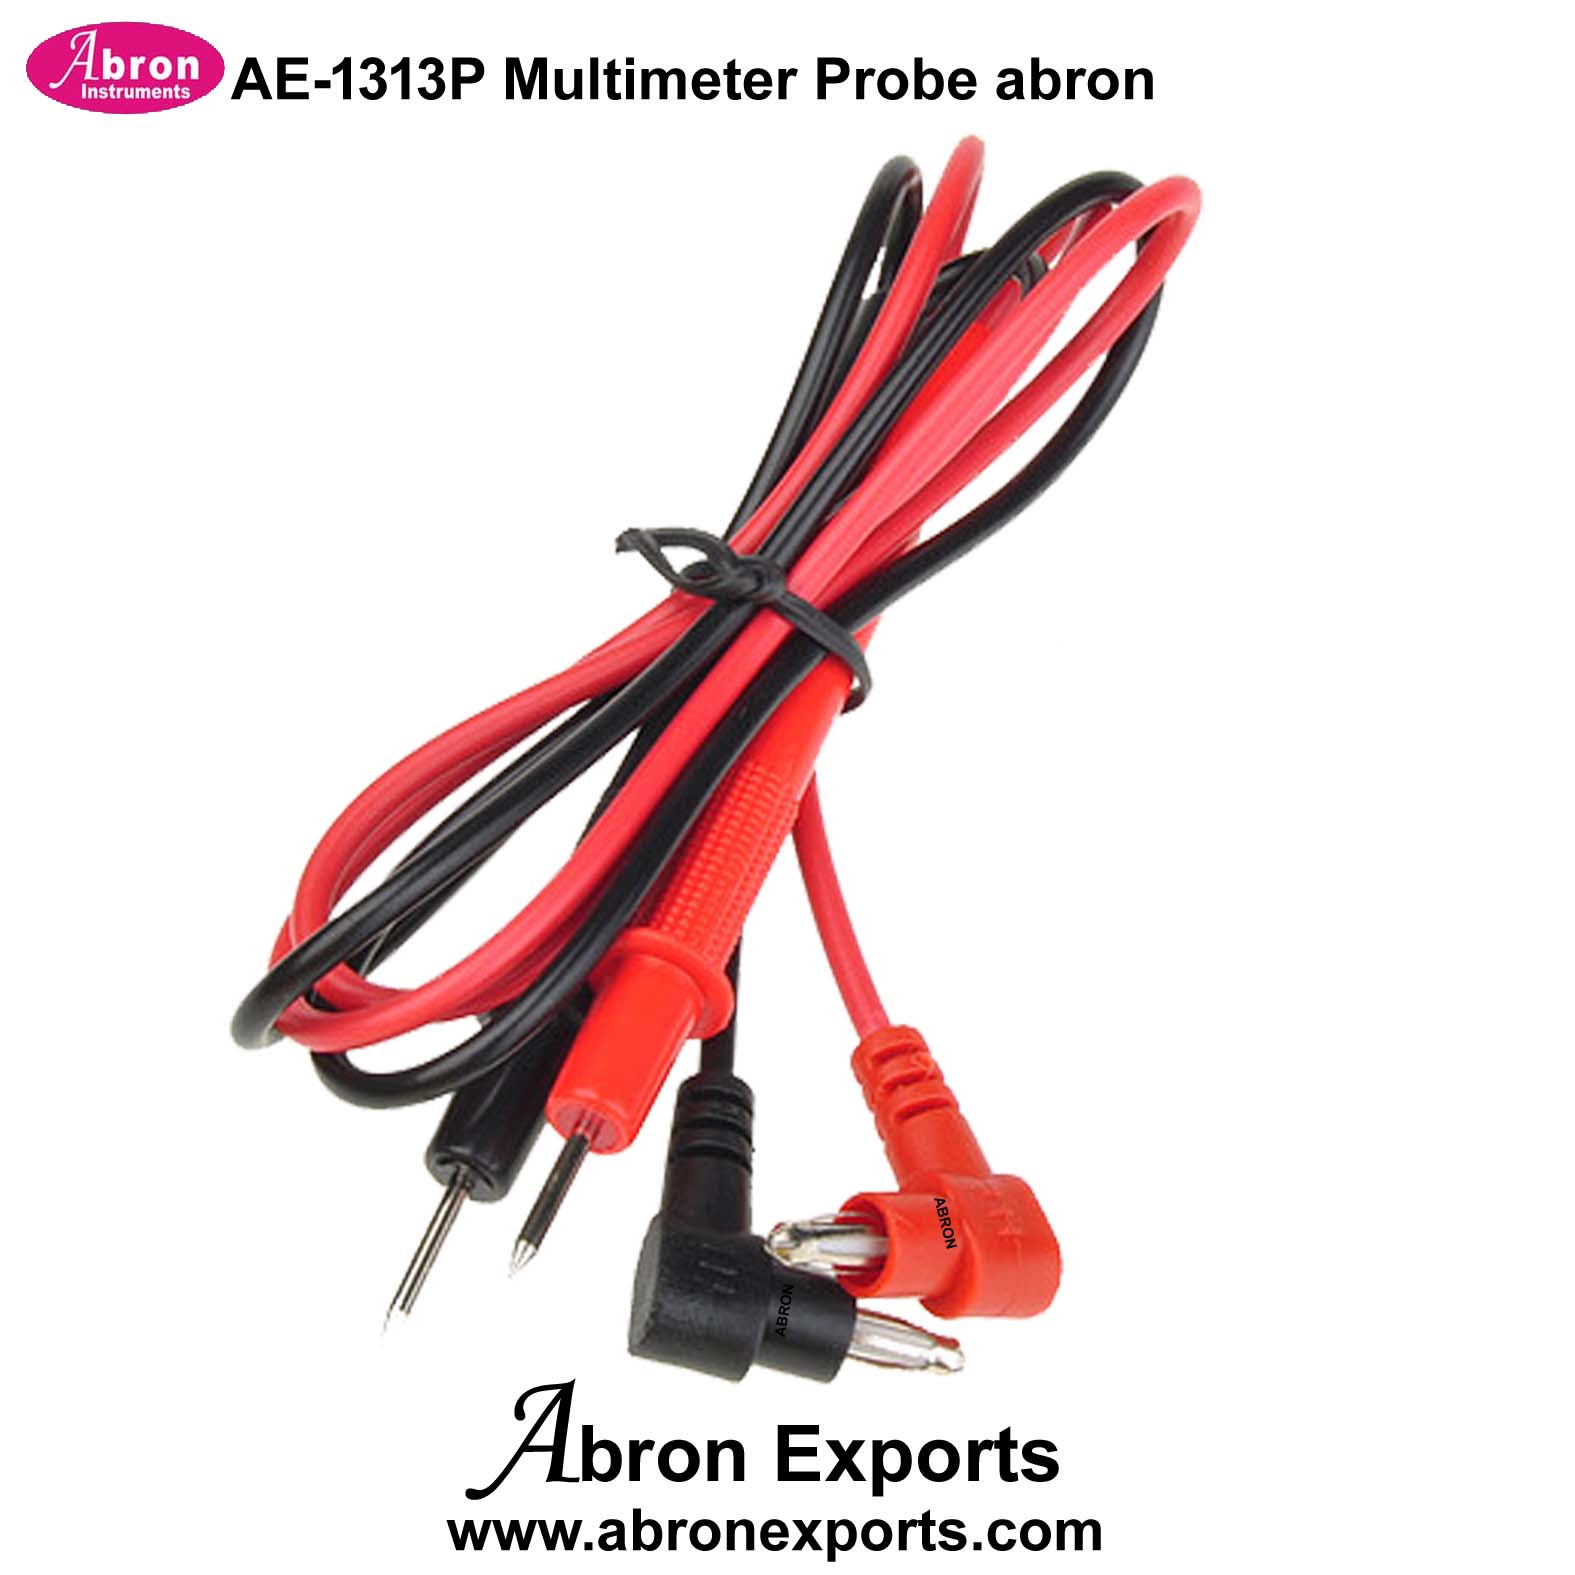 Multimeter Spare Probe Set Black And Red With Small And Long Probes 1 pair Abron AE-1313P 